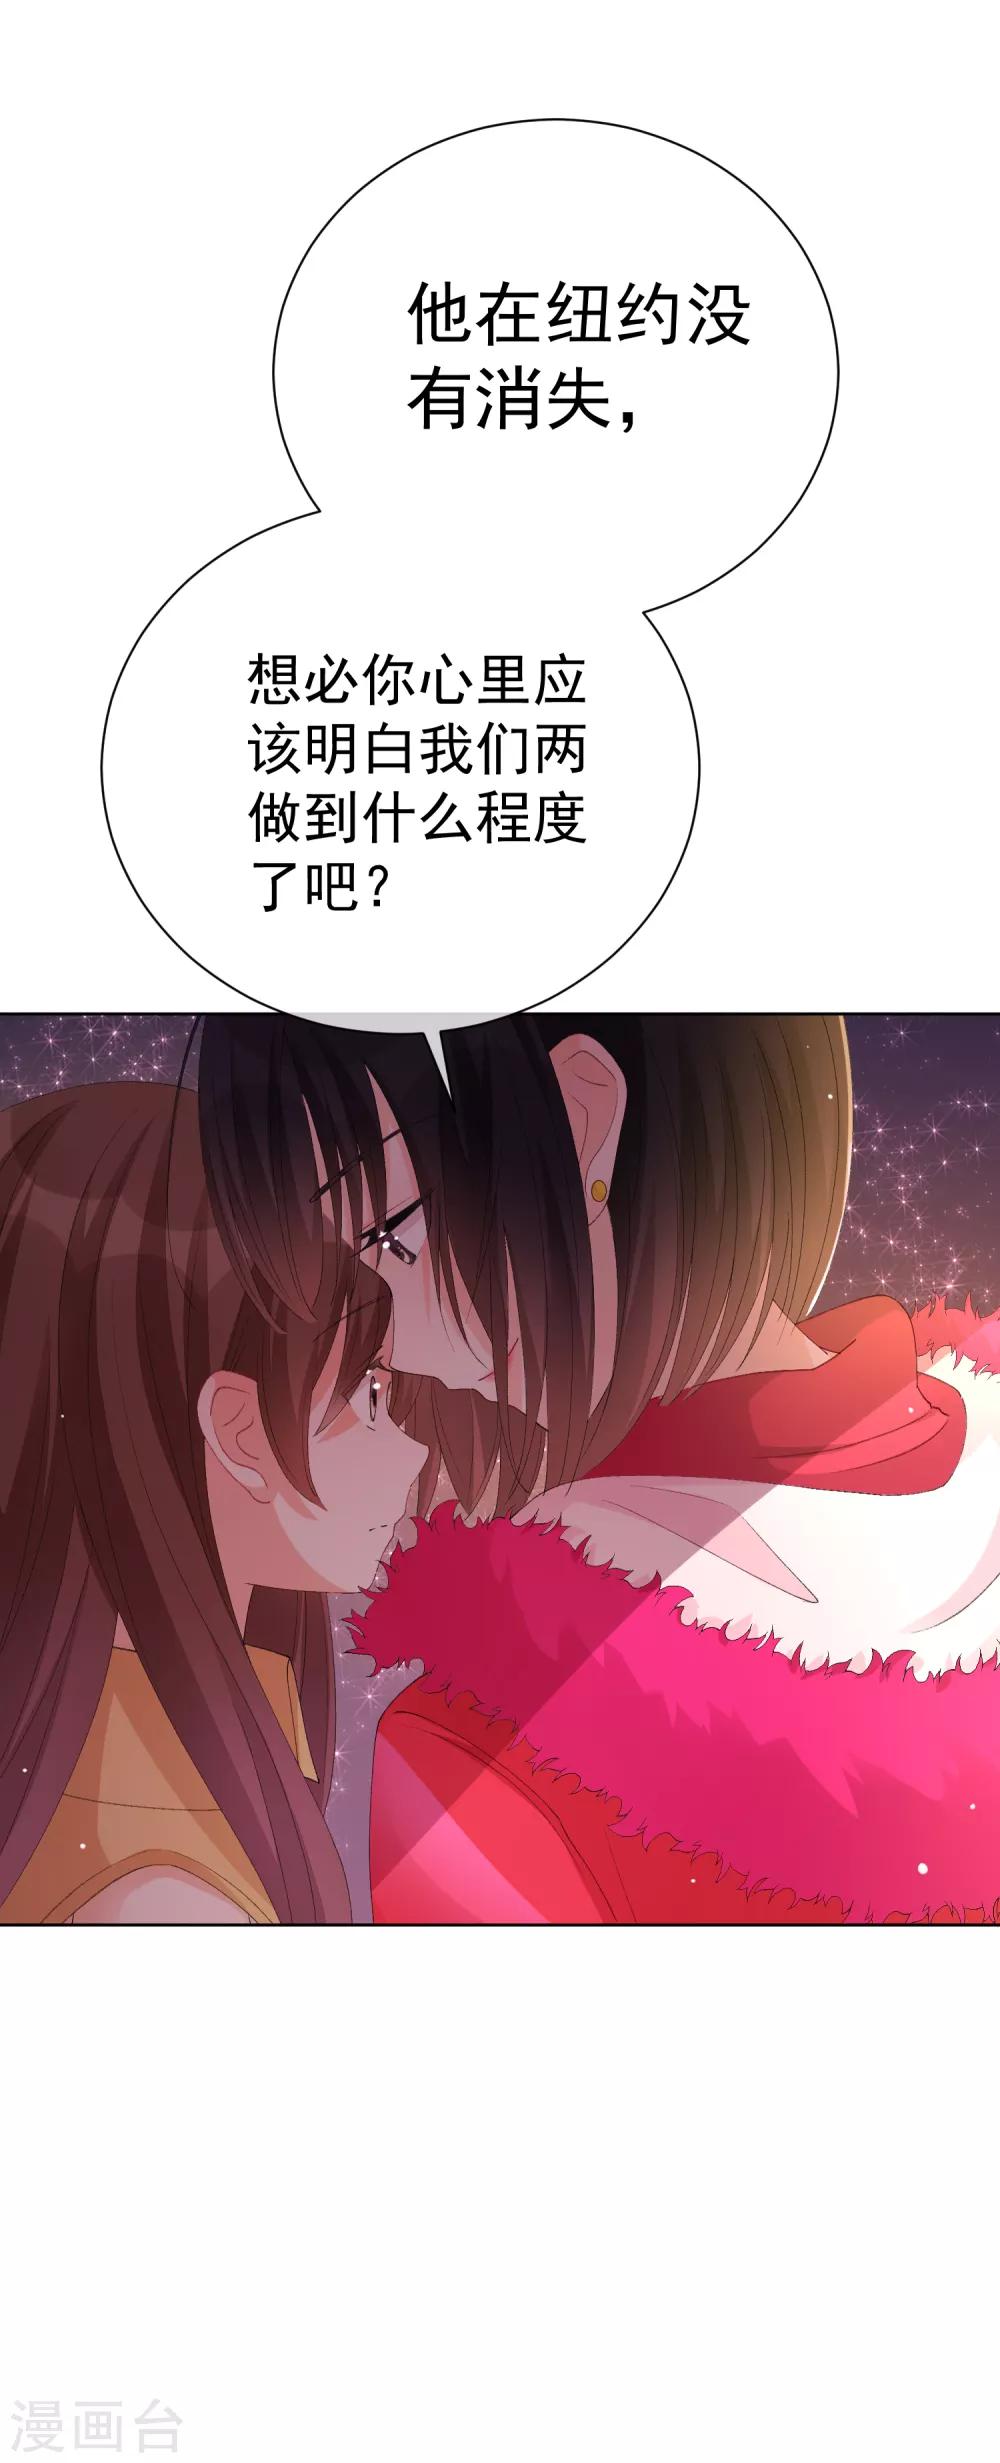 One Kiss A Day - 第39话 对不起 - 4